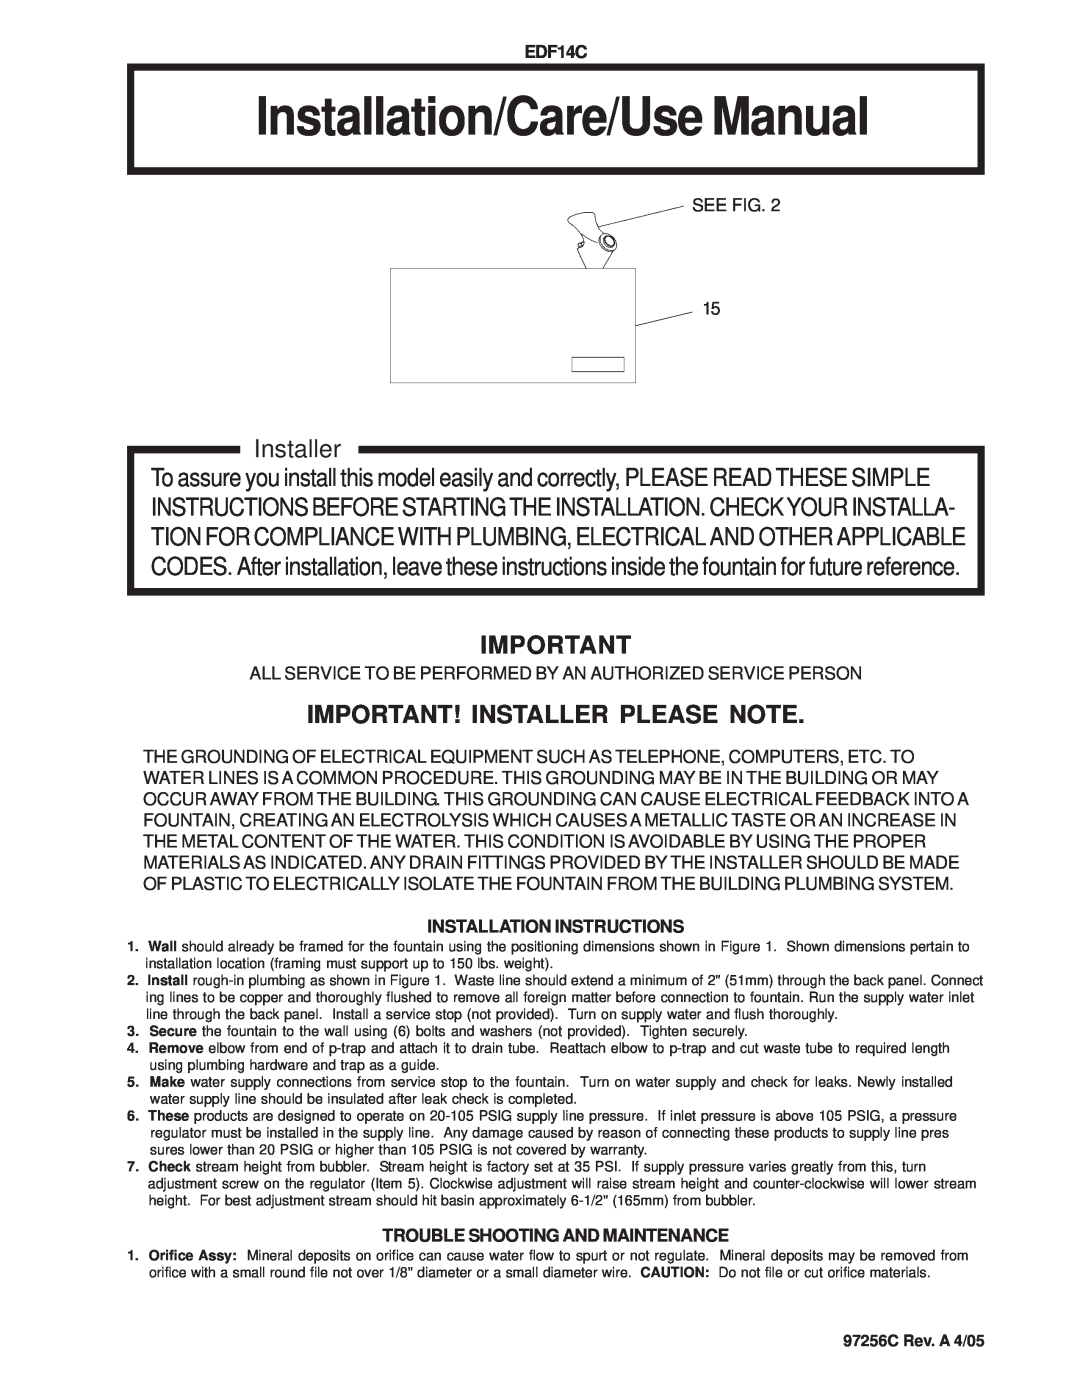 Elkay EDF14C installation instructions Installation Instructions, Trouble Shooting And Maintenance, Installer 